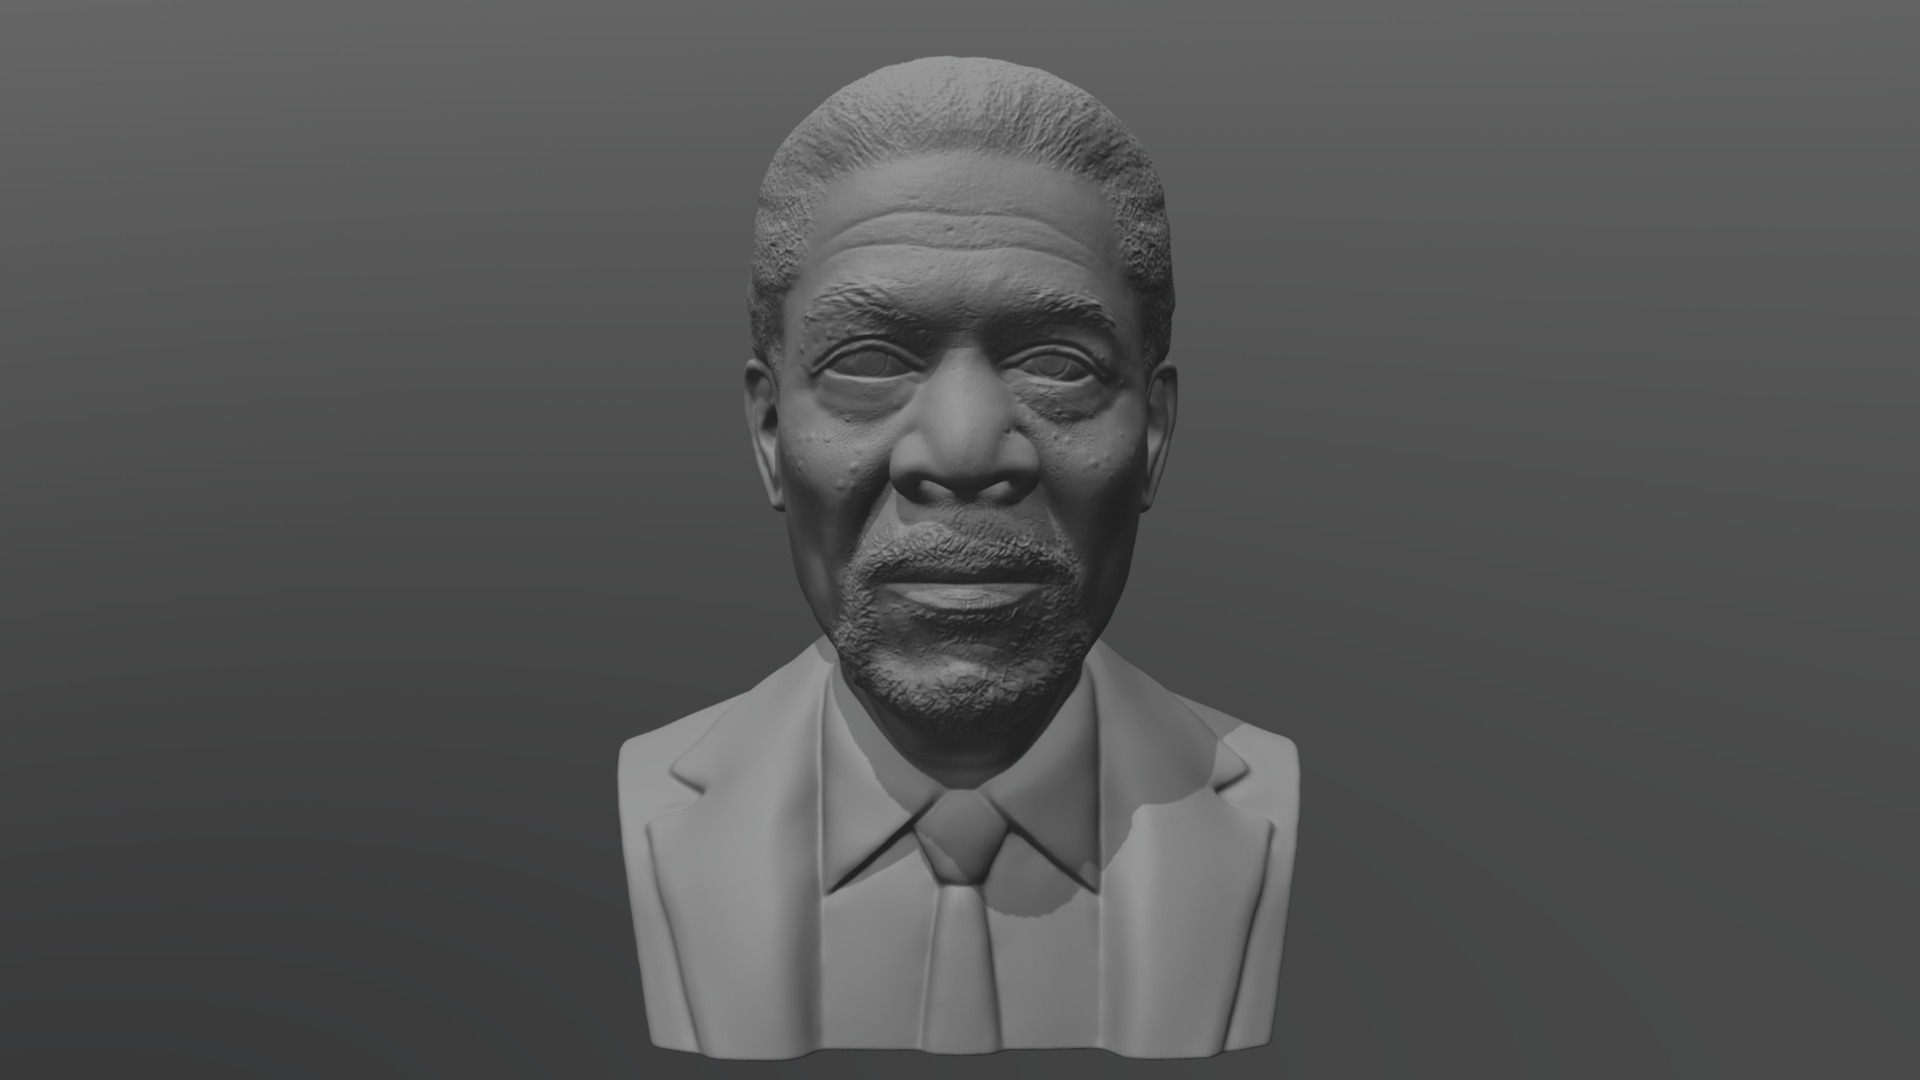 Here is Morgan Freeman bust 3D model ready for 3D printing. The model current size is 5 cm height, but you are free to scale it. Zip file contains stl. The model was created in ZBrush.

If you have any questions please don’t hesitate to contact me. I will respond you ASAP. I encourage you to check my other celebrity 3D models 3d model